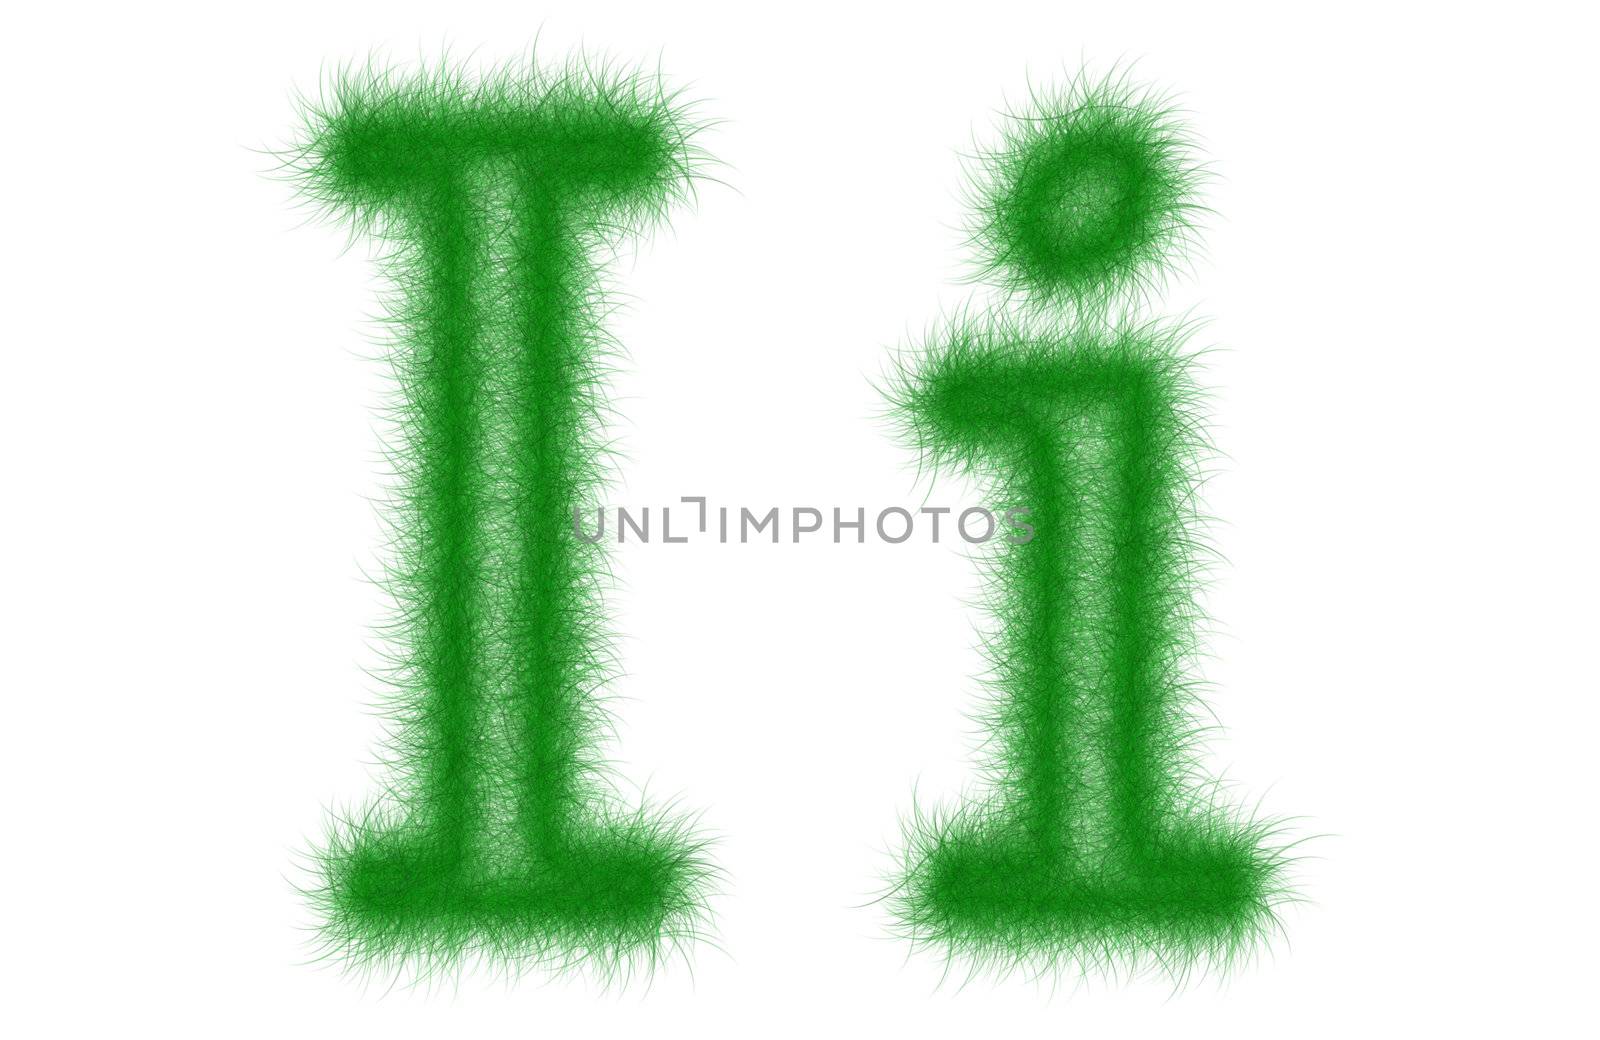 Green grass font isolated on white background by mozzyb